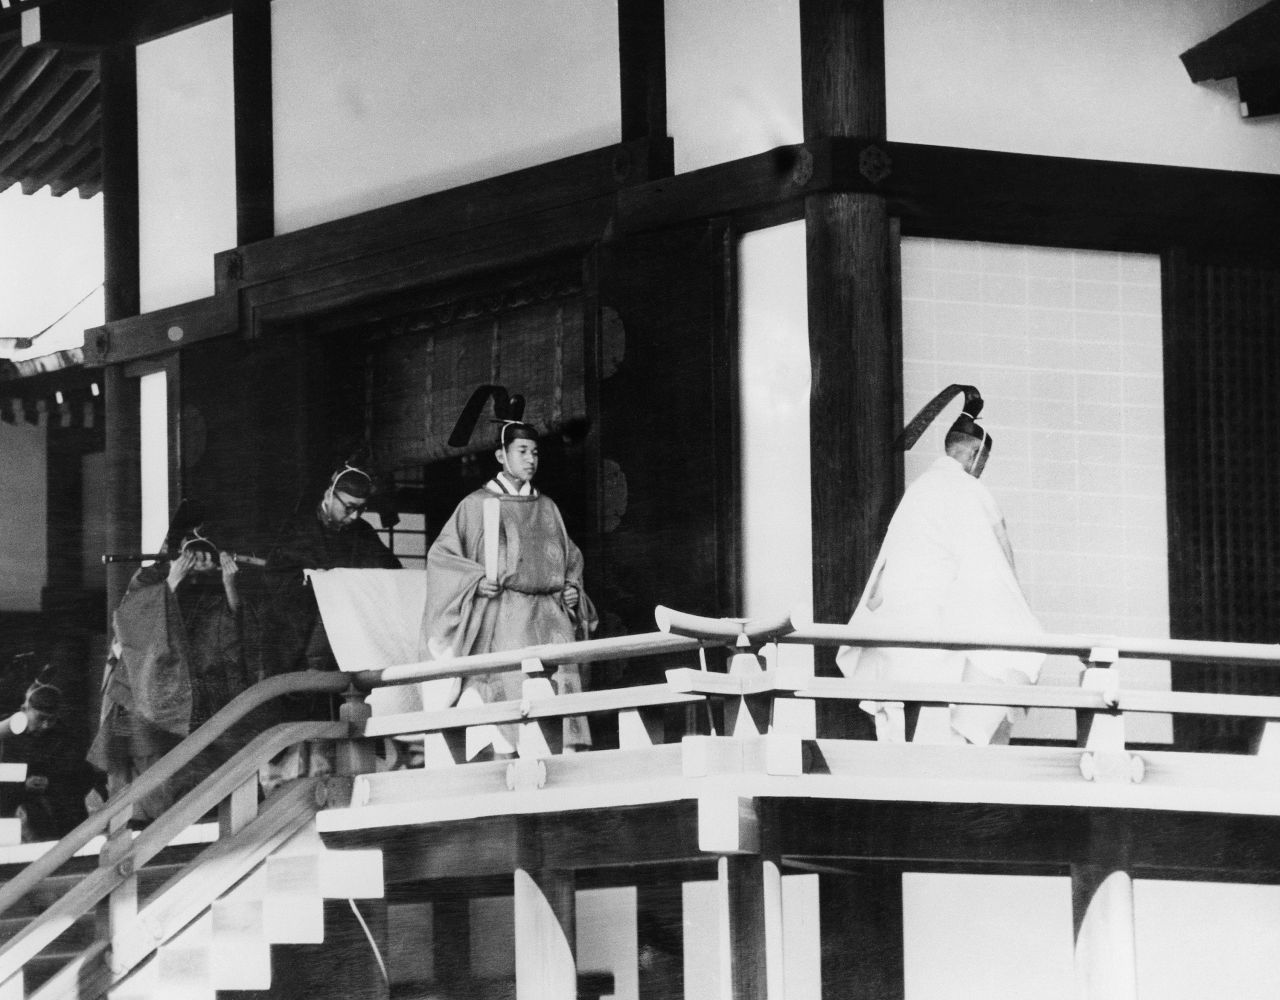 Akihito, second from the right, is assisted by an official as he enters a Shinto sanctuary inside the Imperial Palace on his wedding day in 1959.